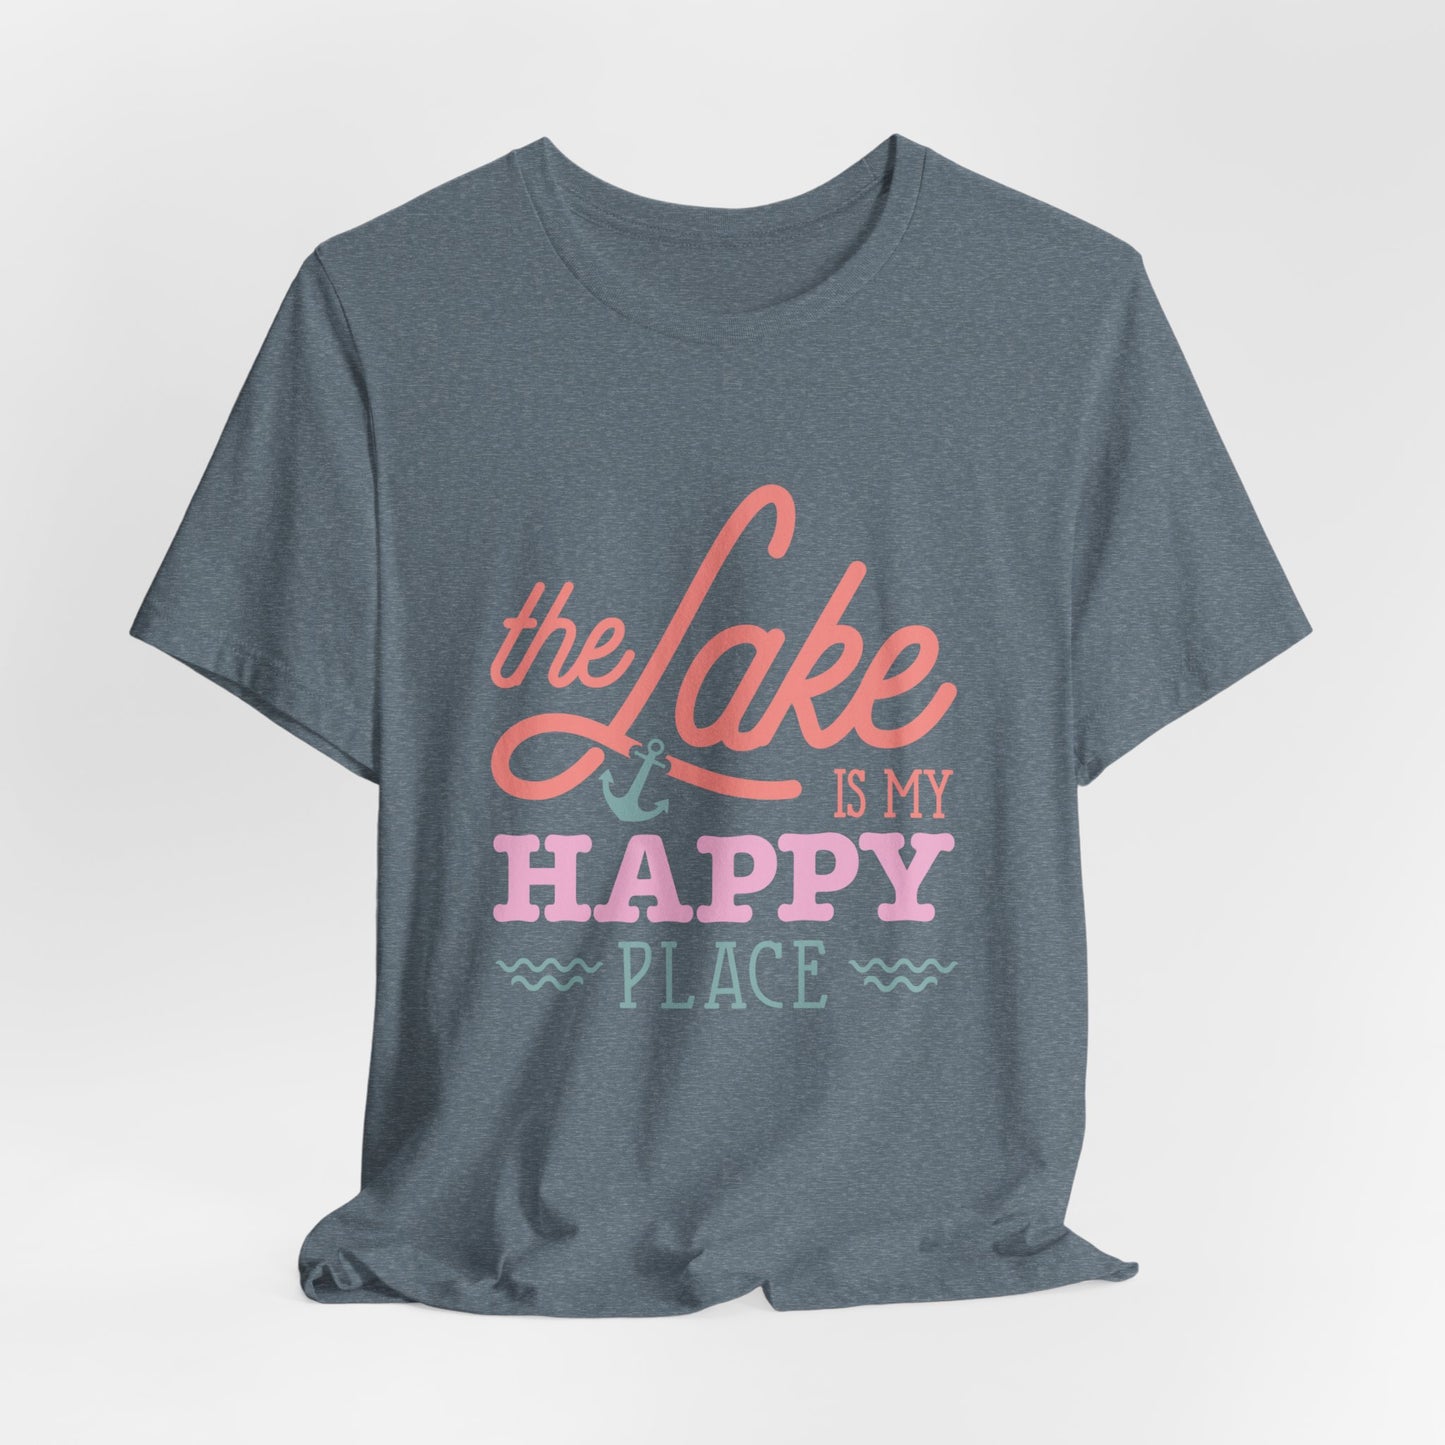 The Lake is My Happy Place Women's Short Sleeve Tee